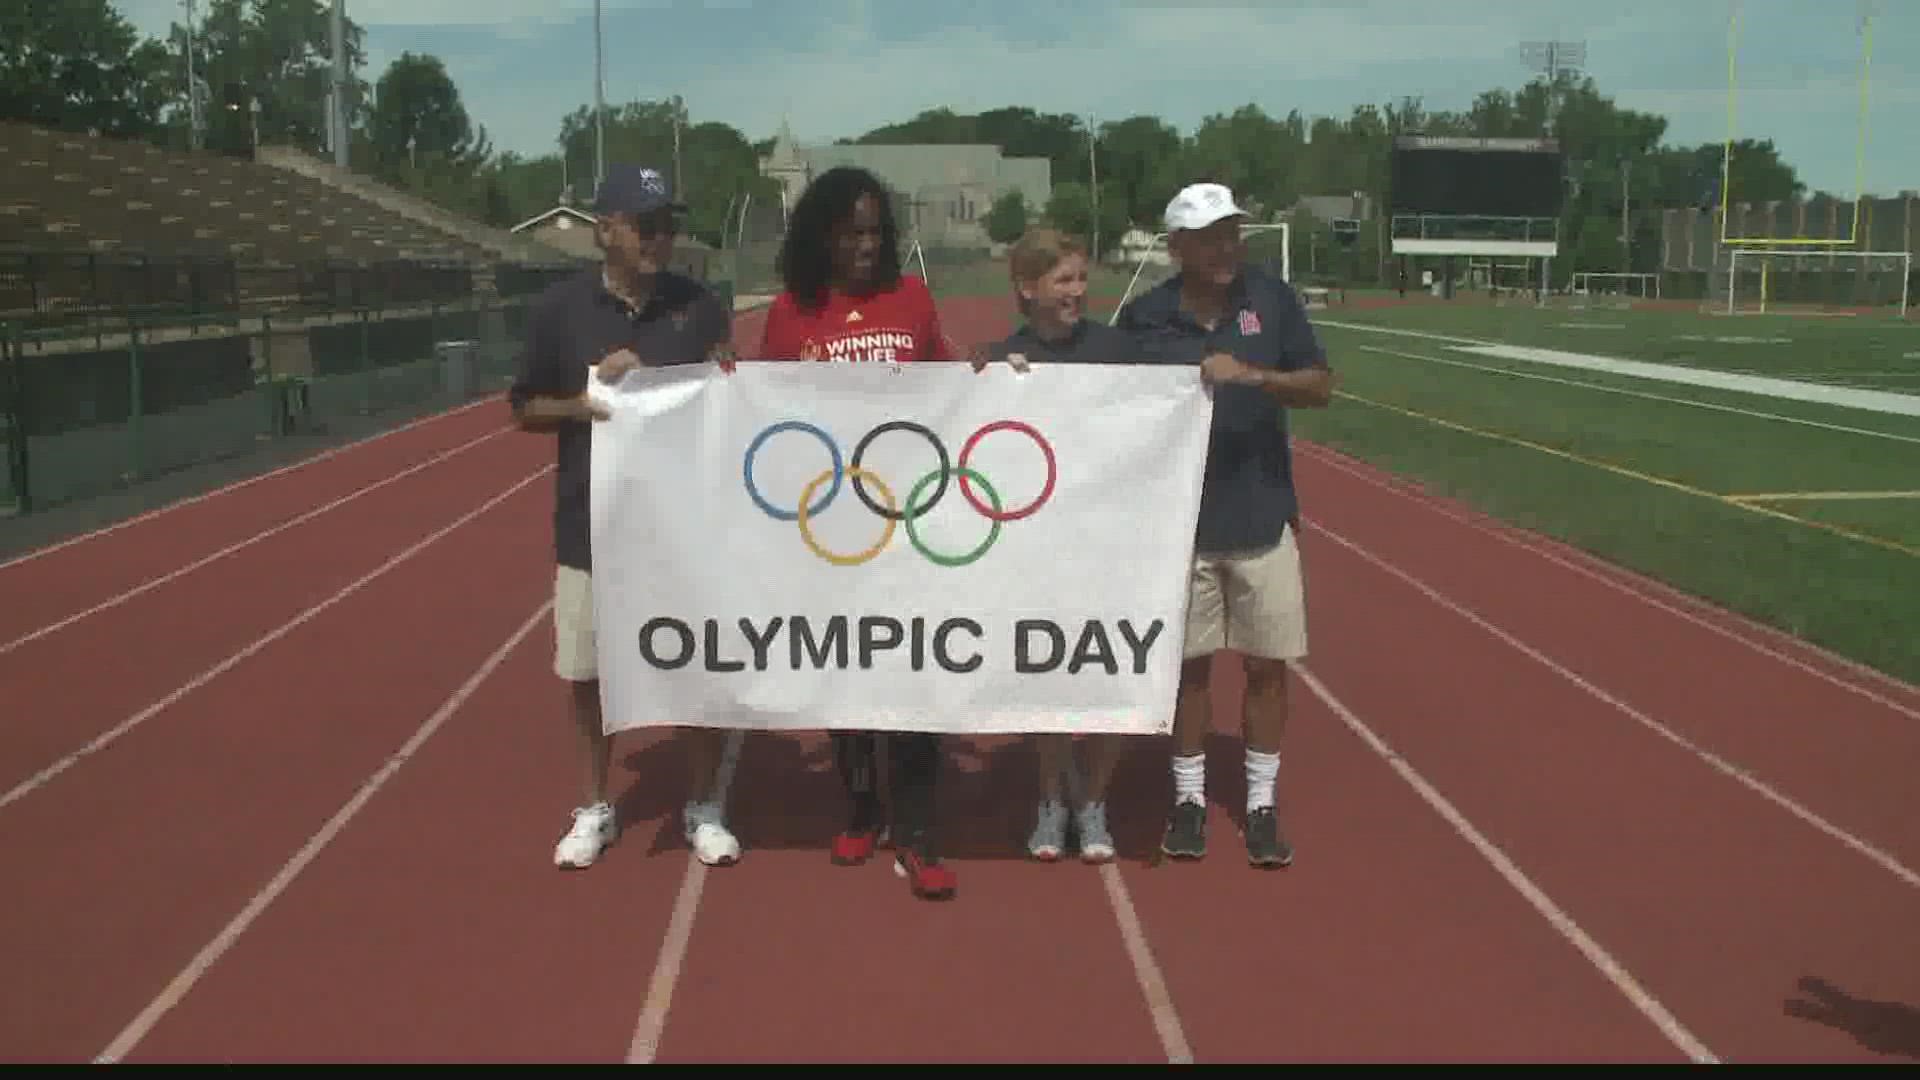 Jackie Joyner-Kersee and Lori Chalupny hosted the celebration of the Olympics in St. Louis.